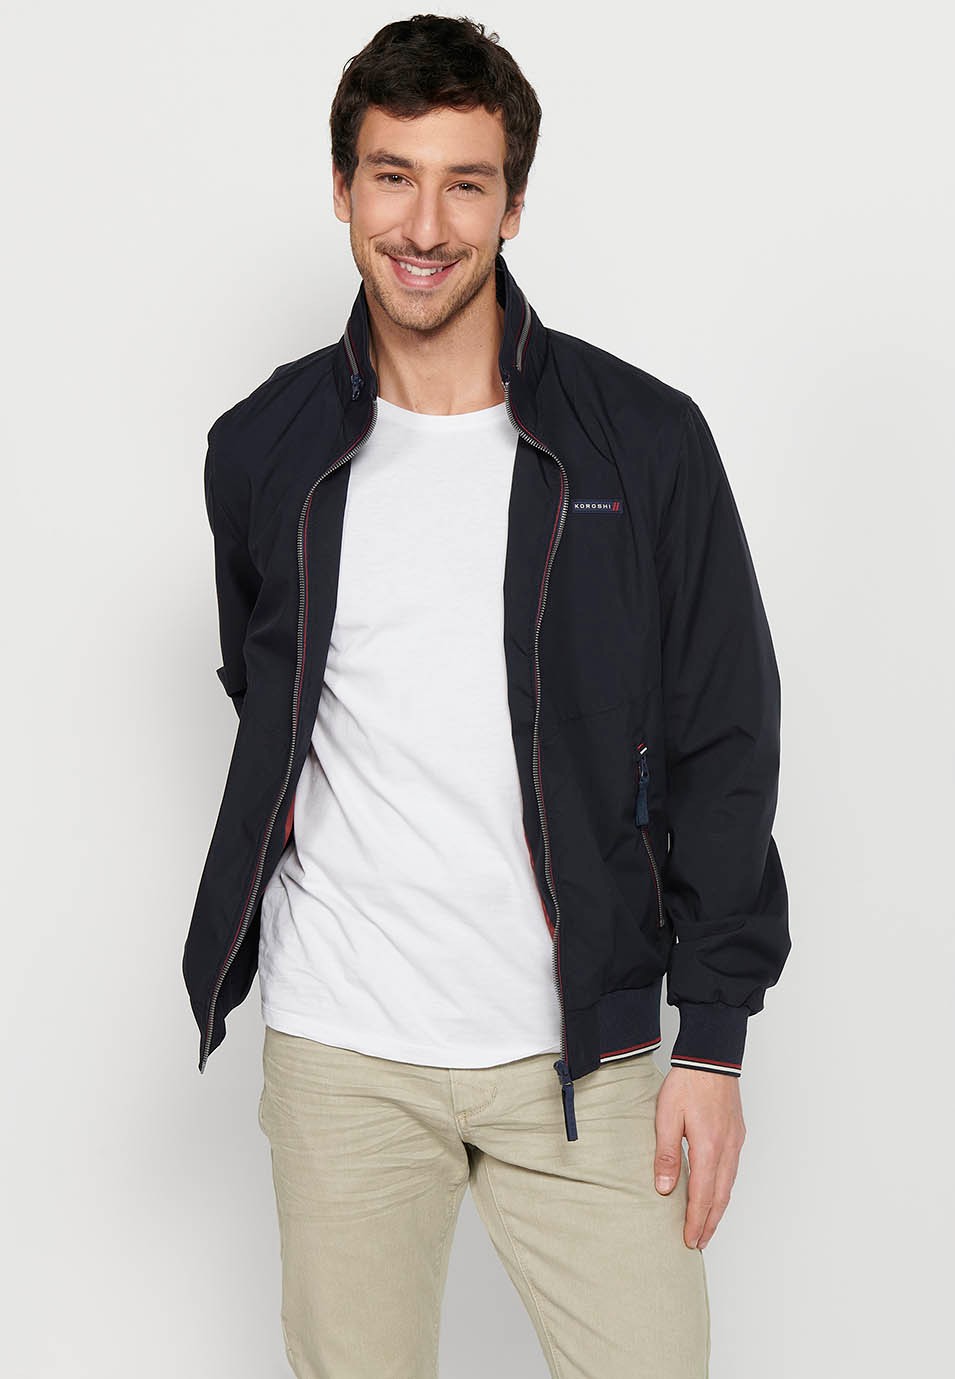 Long-sleeved high-neck jacket with front zipper closure and ribbed finishes with pockets, one inside in Navy for Men 5